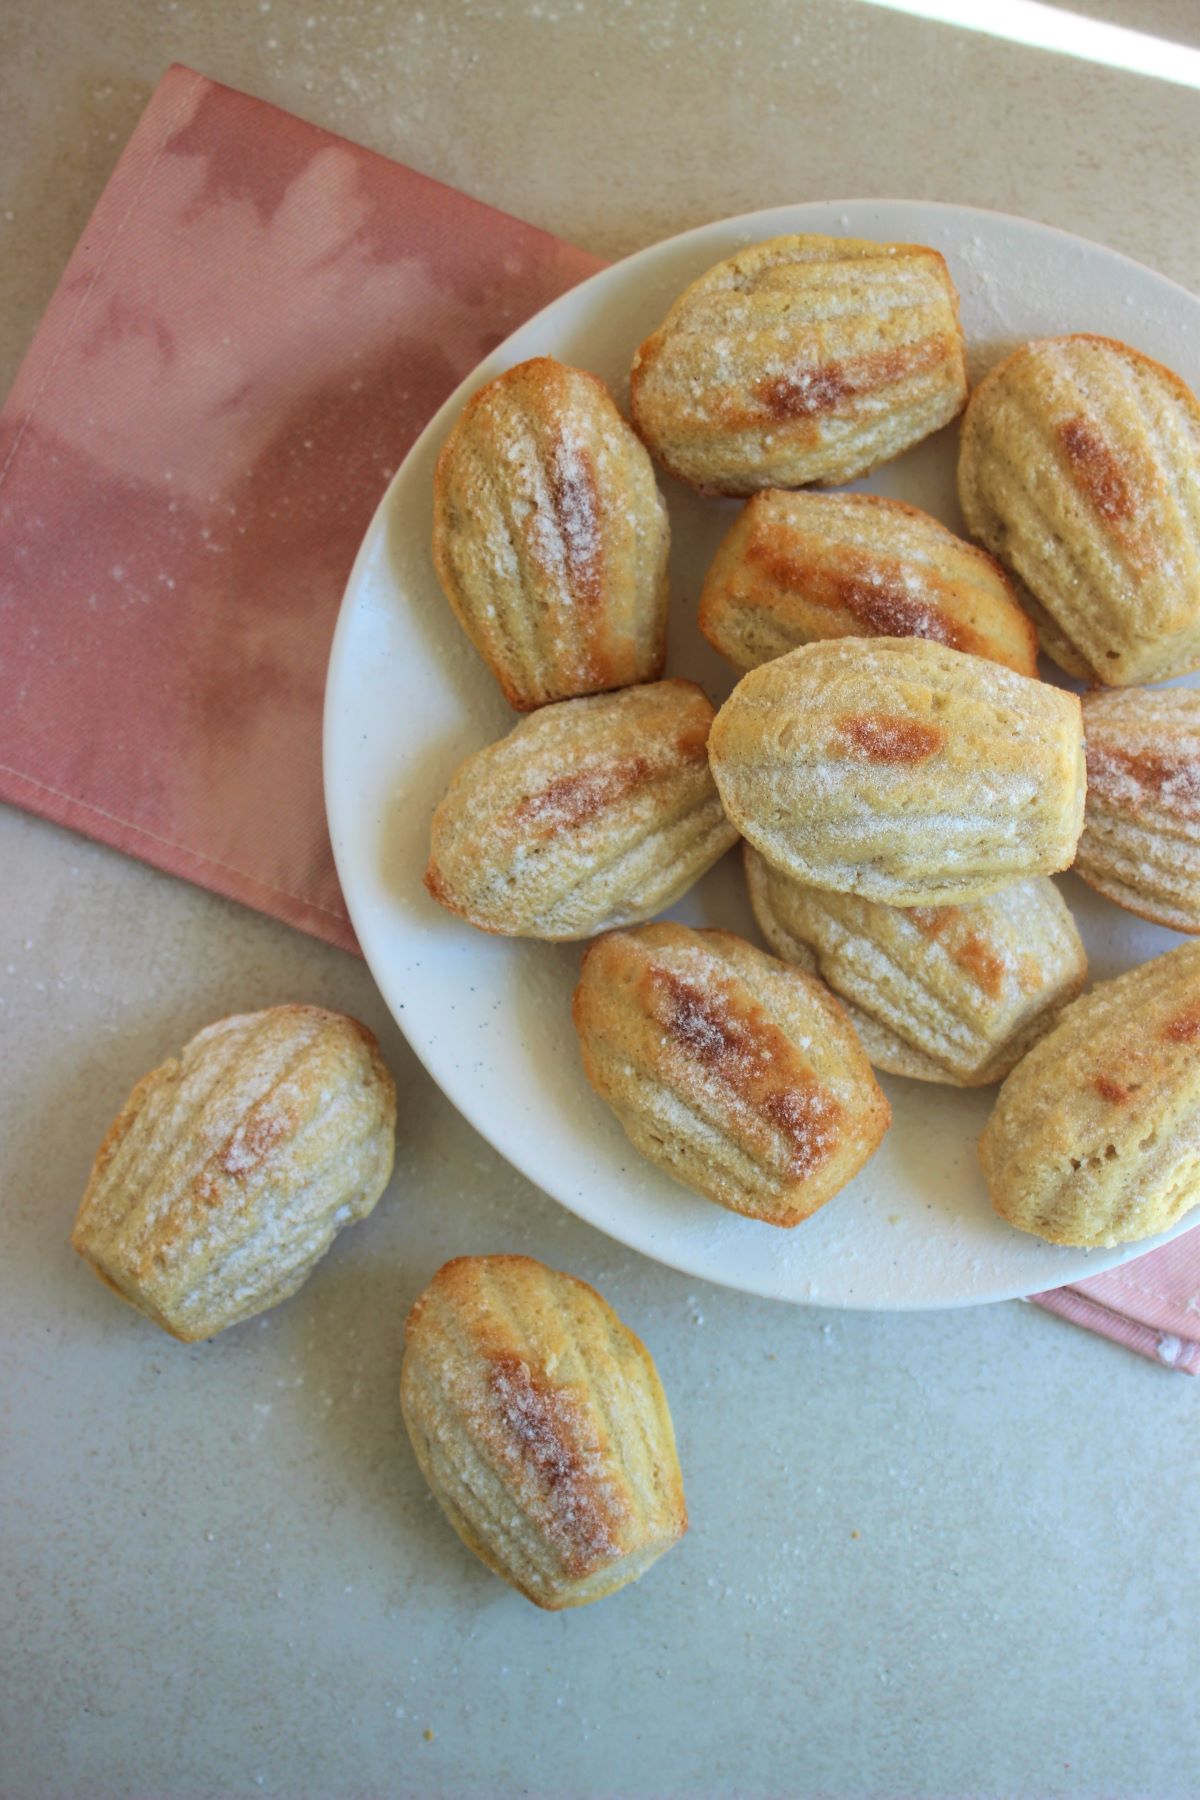 Many madeleines in a white plate, and two madeleines on the side.